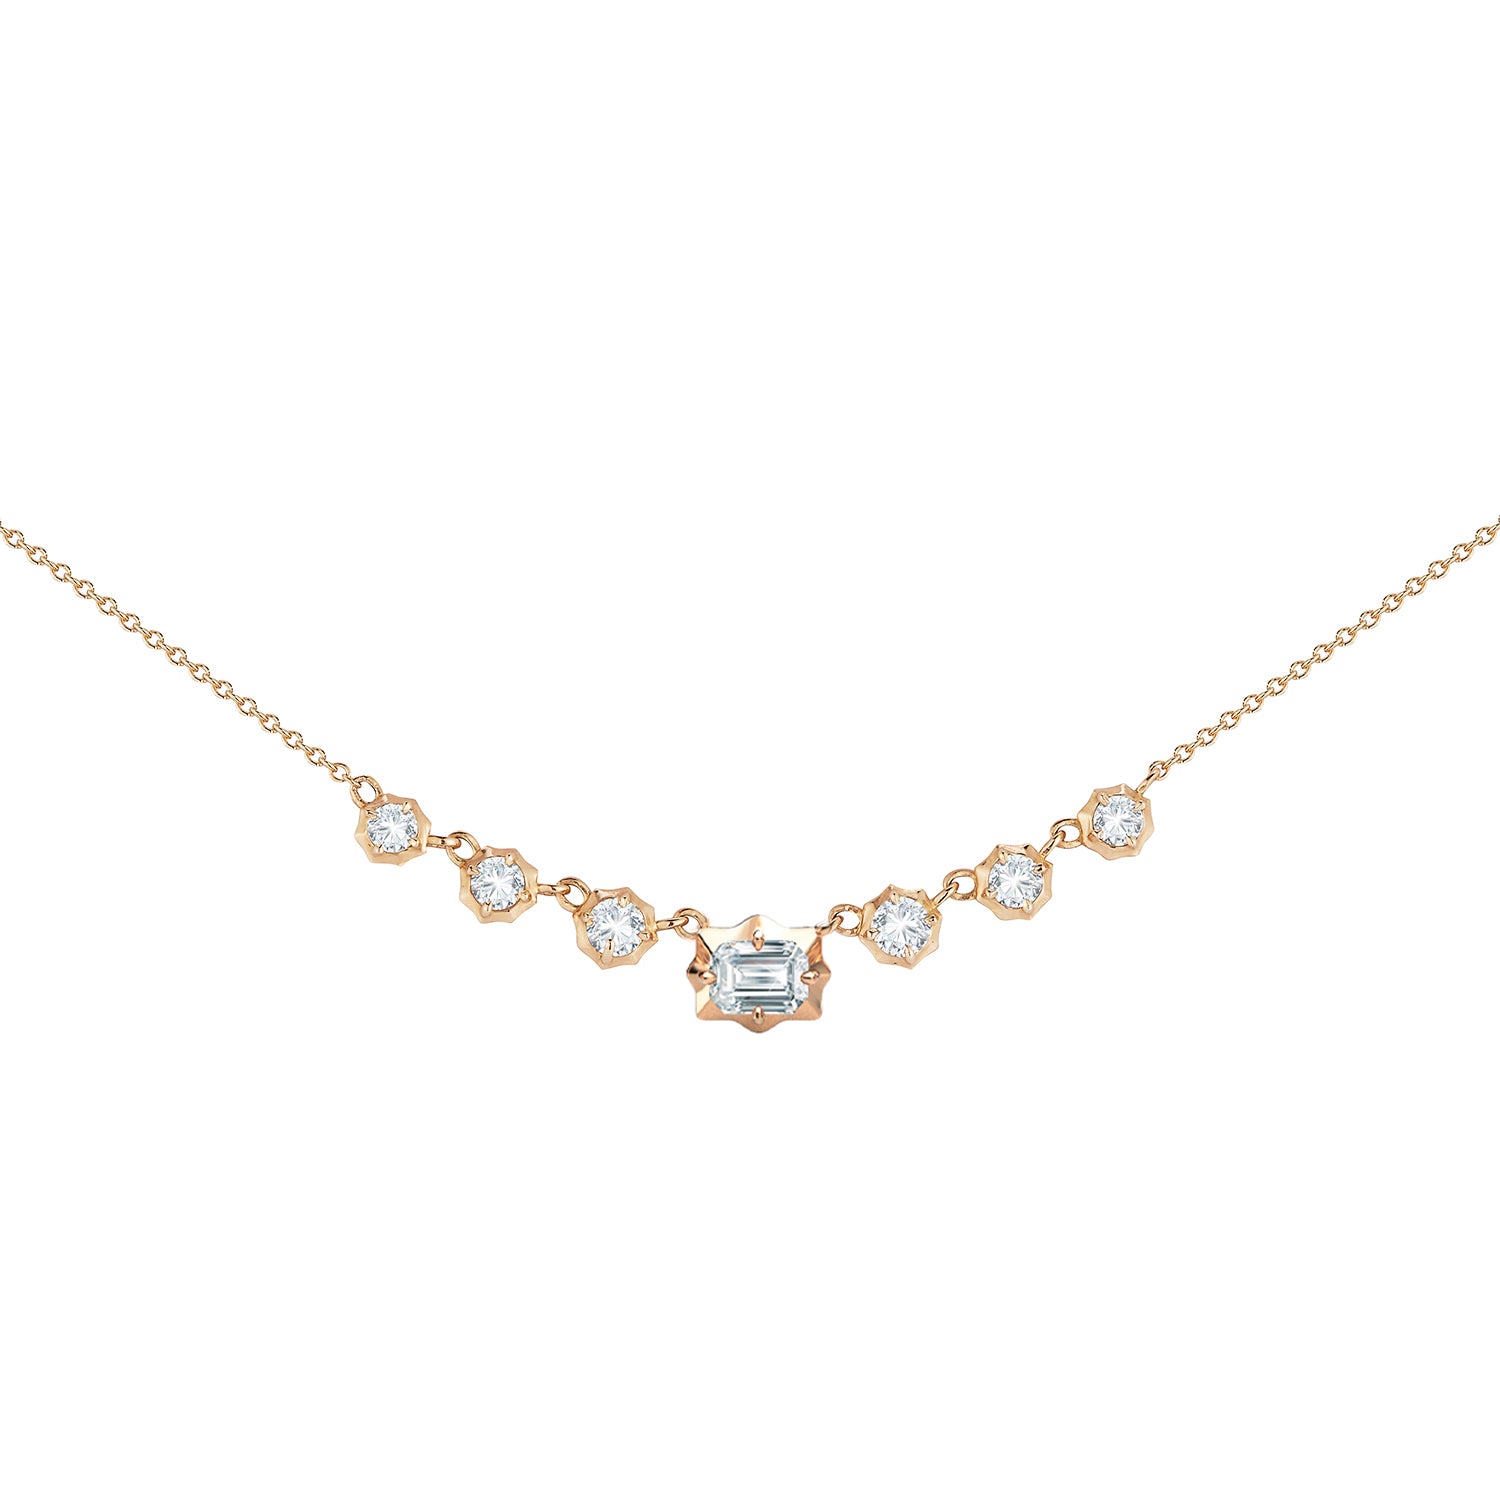 Small Vanguard Necklace in 18K Rose Gold